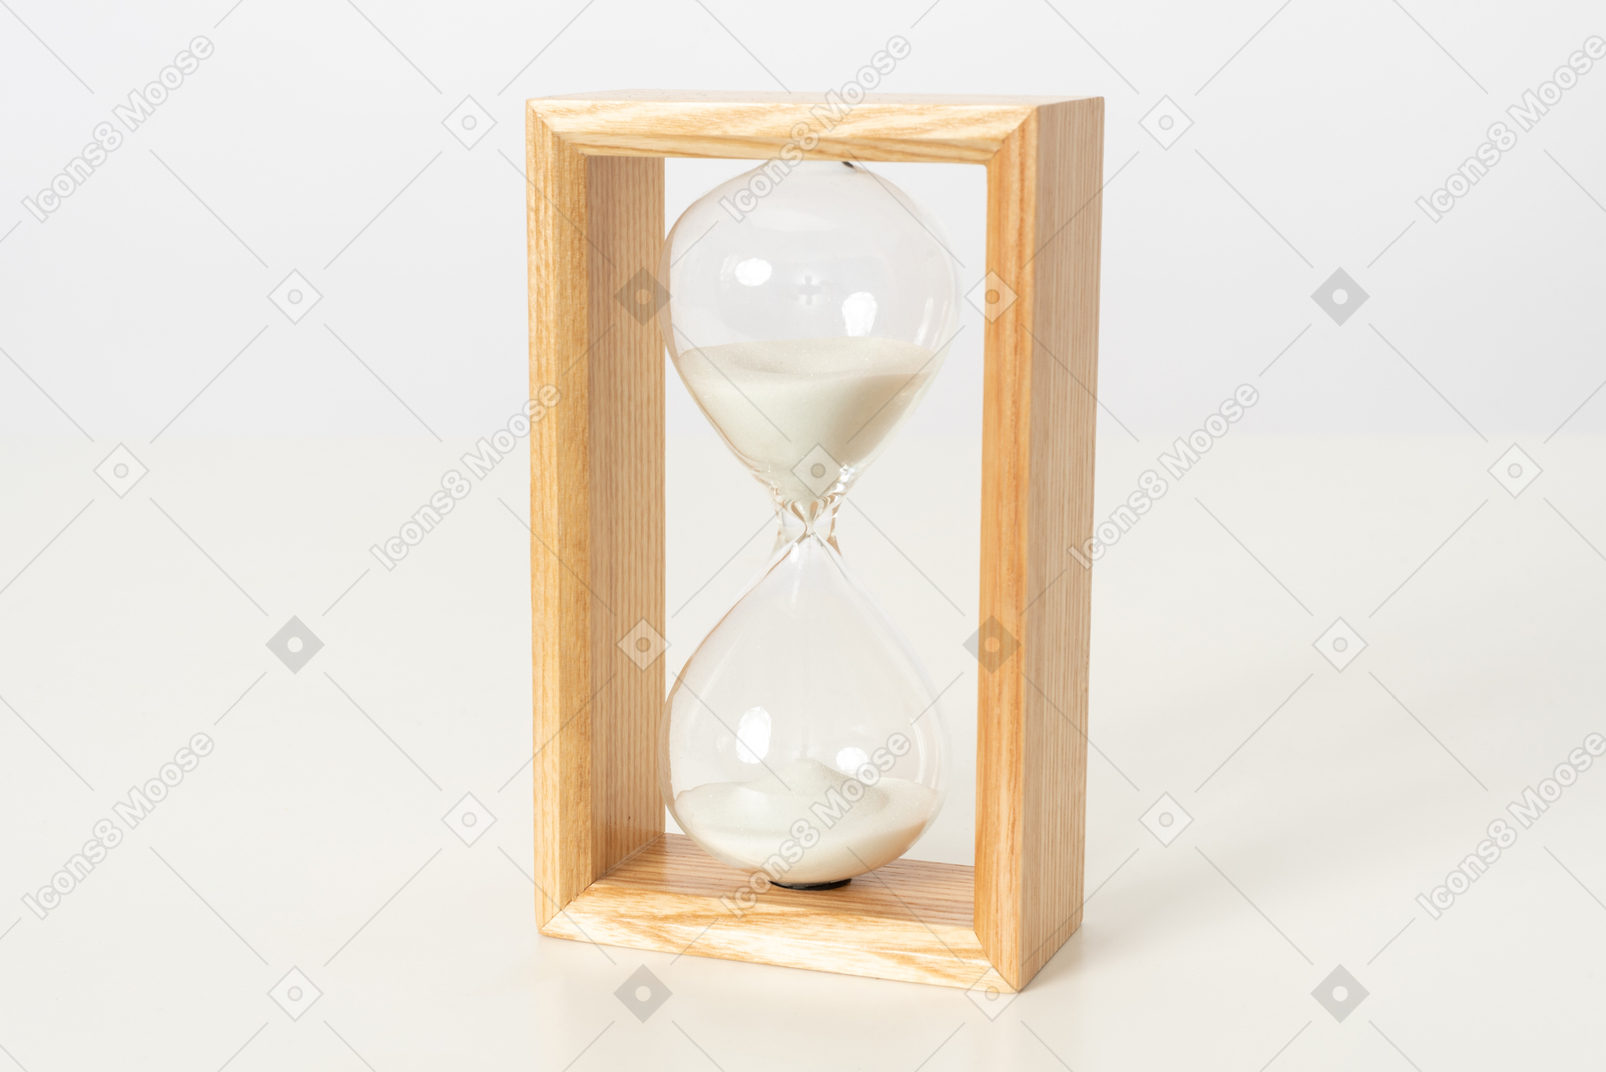 Wooden hourglass on a white background